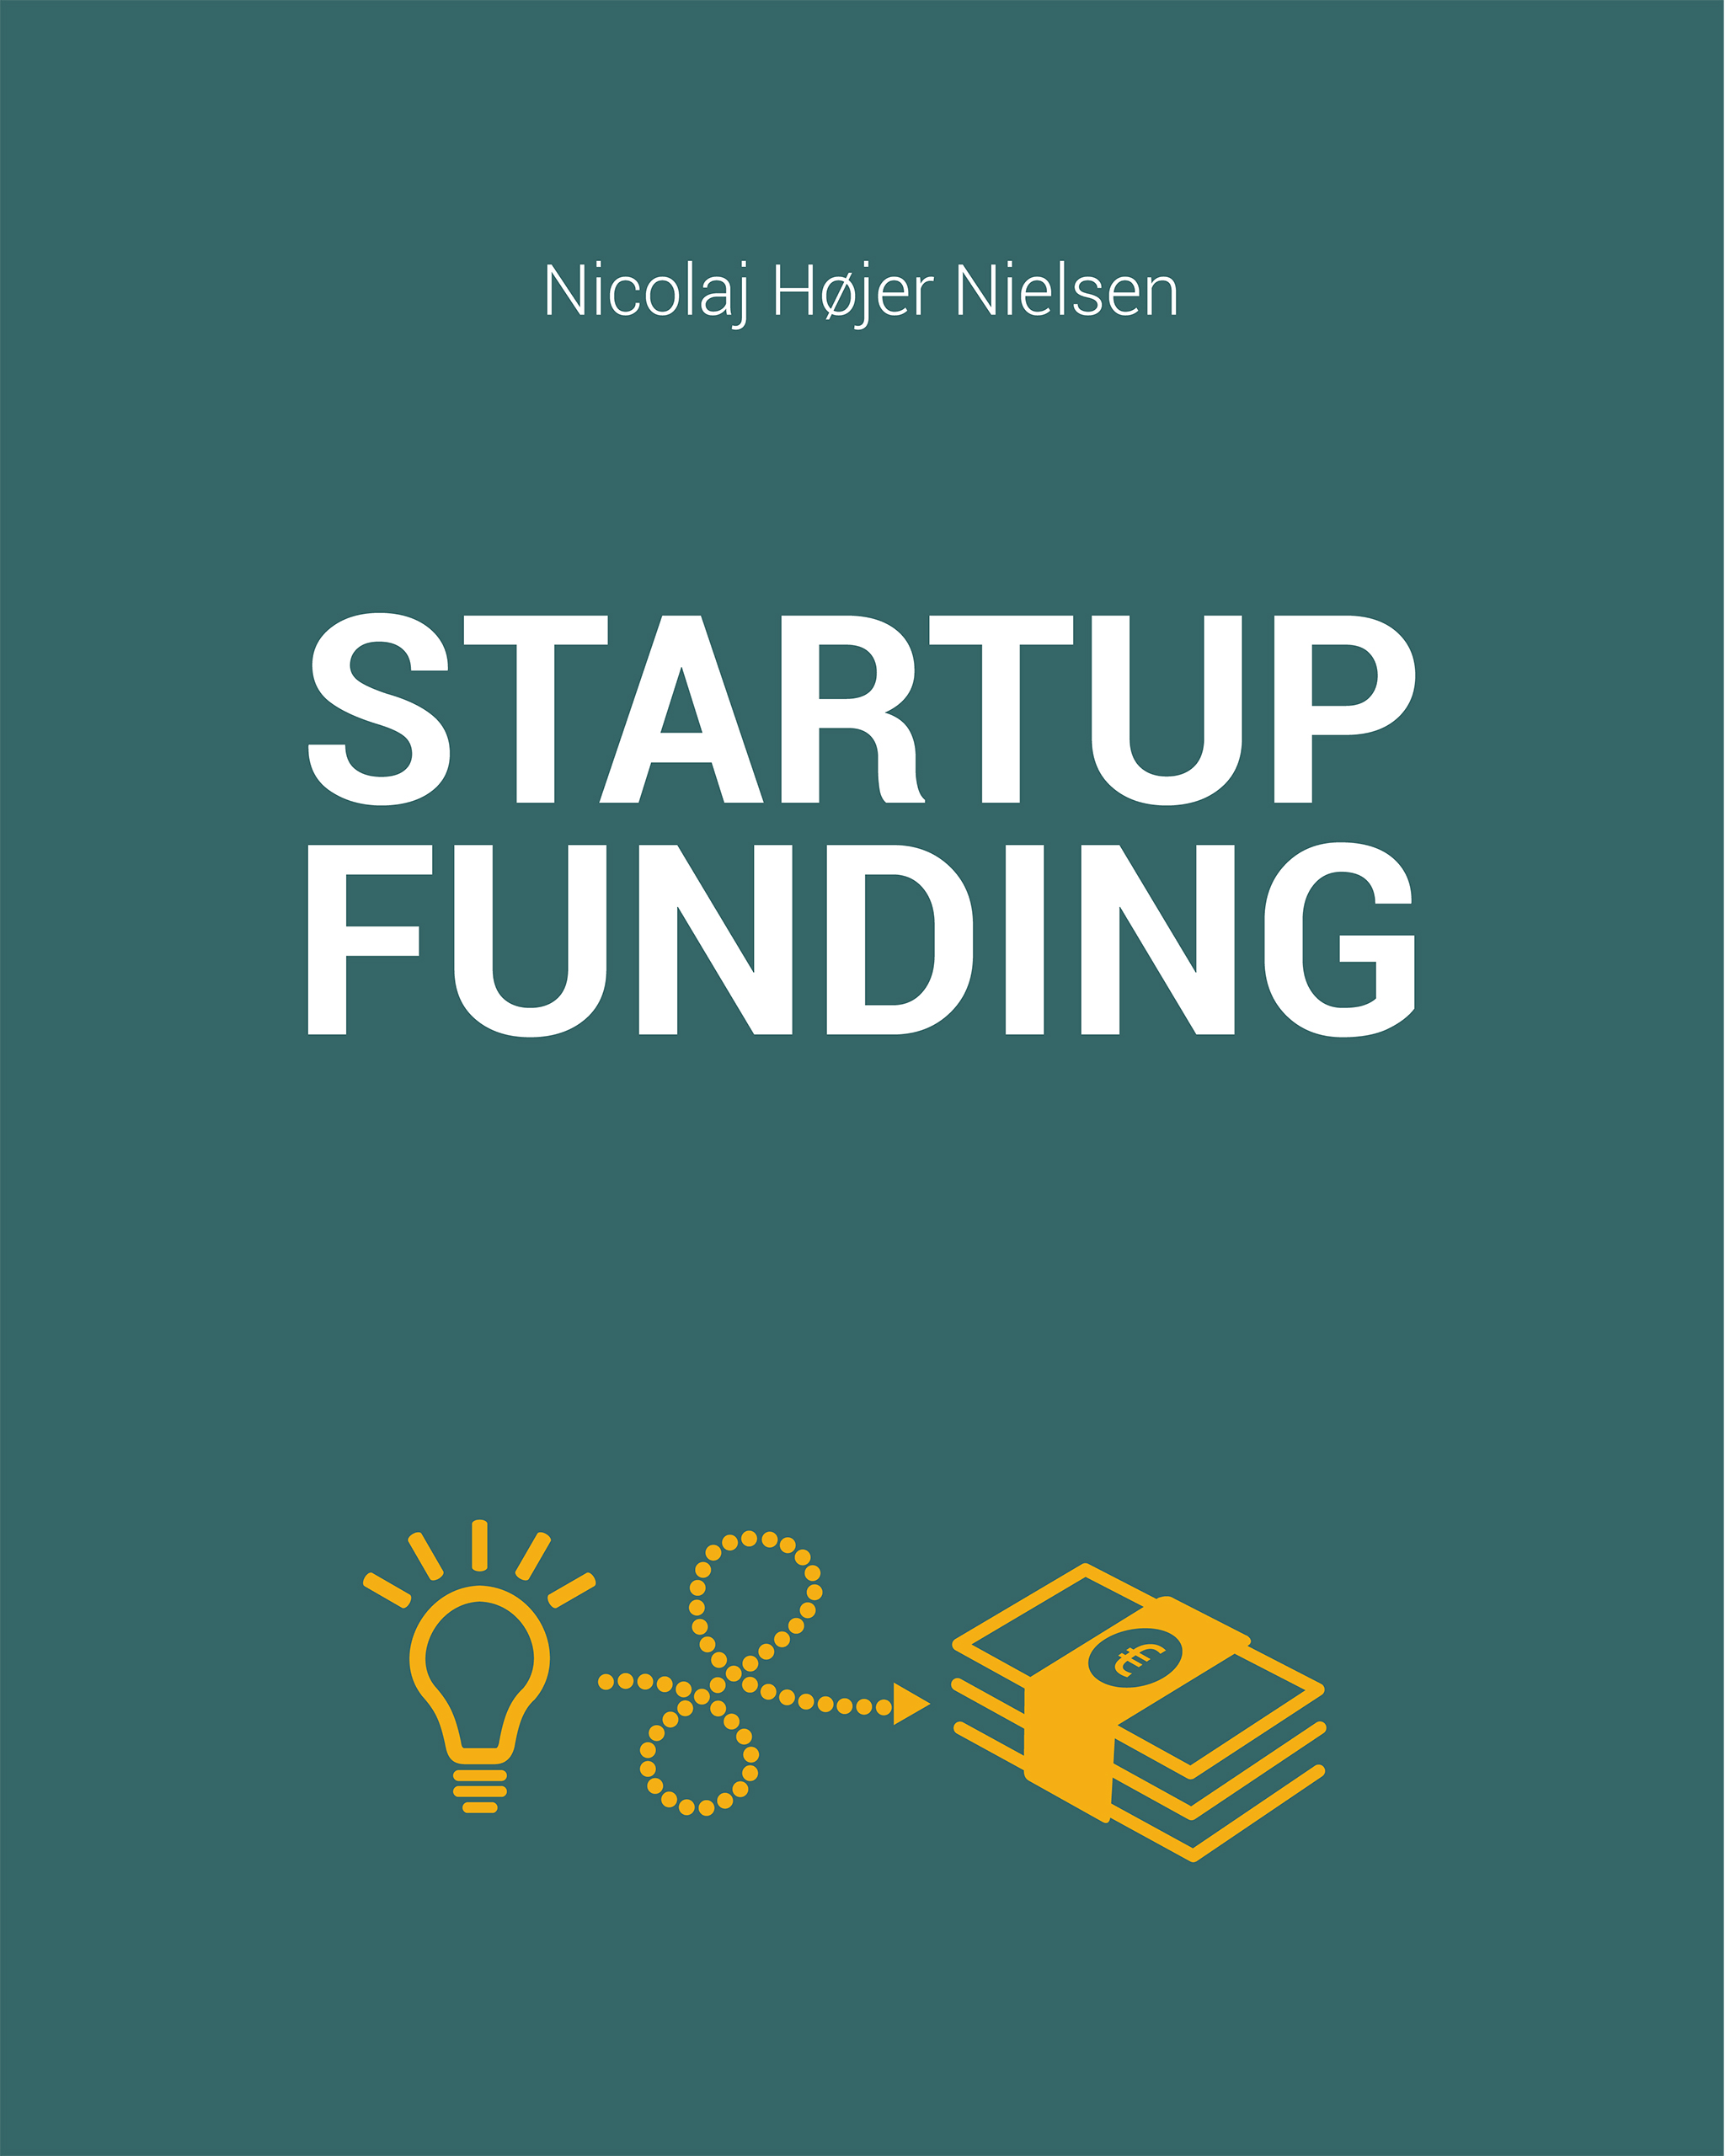 Startup Funding Publication Becomes Internet Phenomenon with 35,000 ...